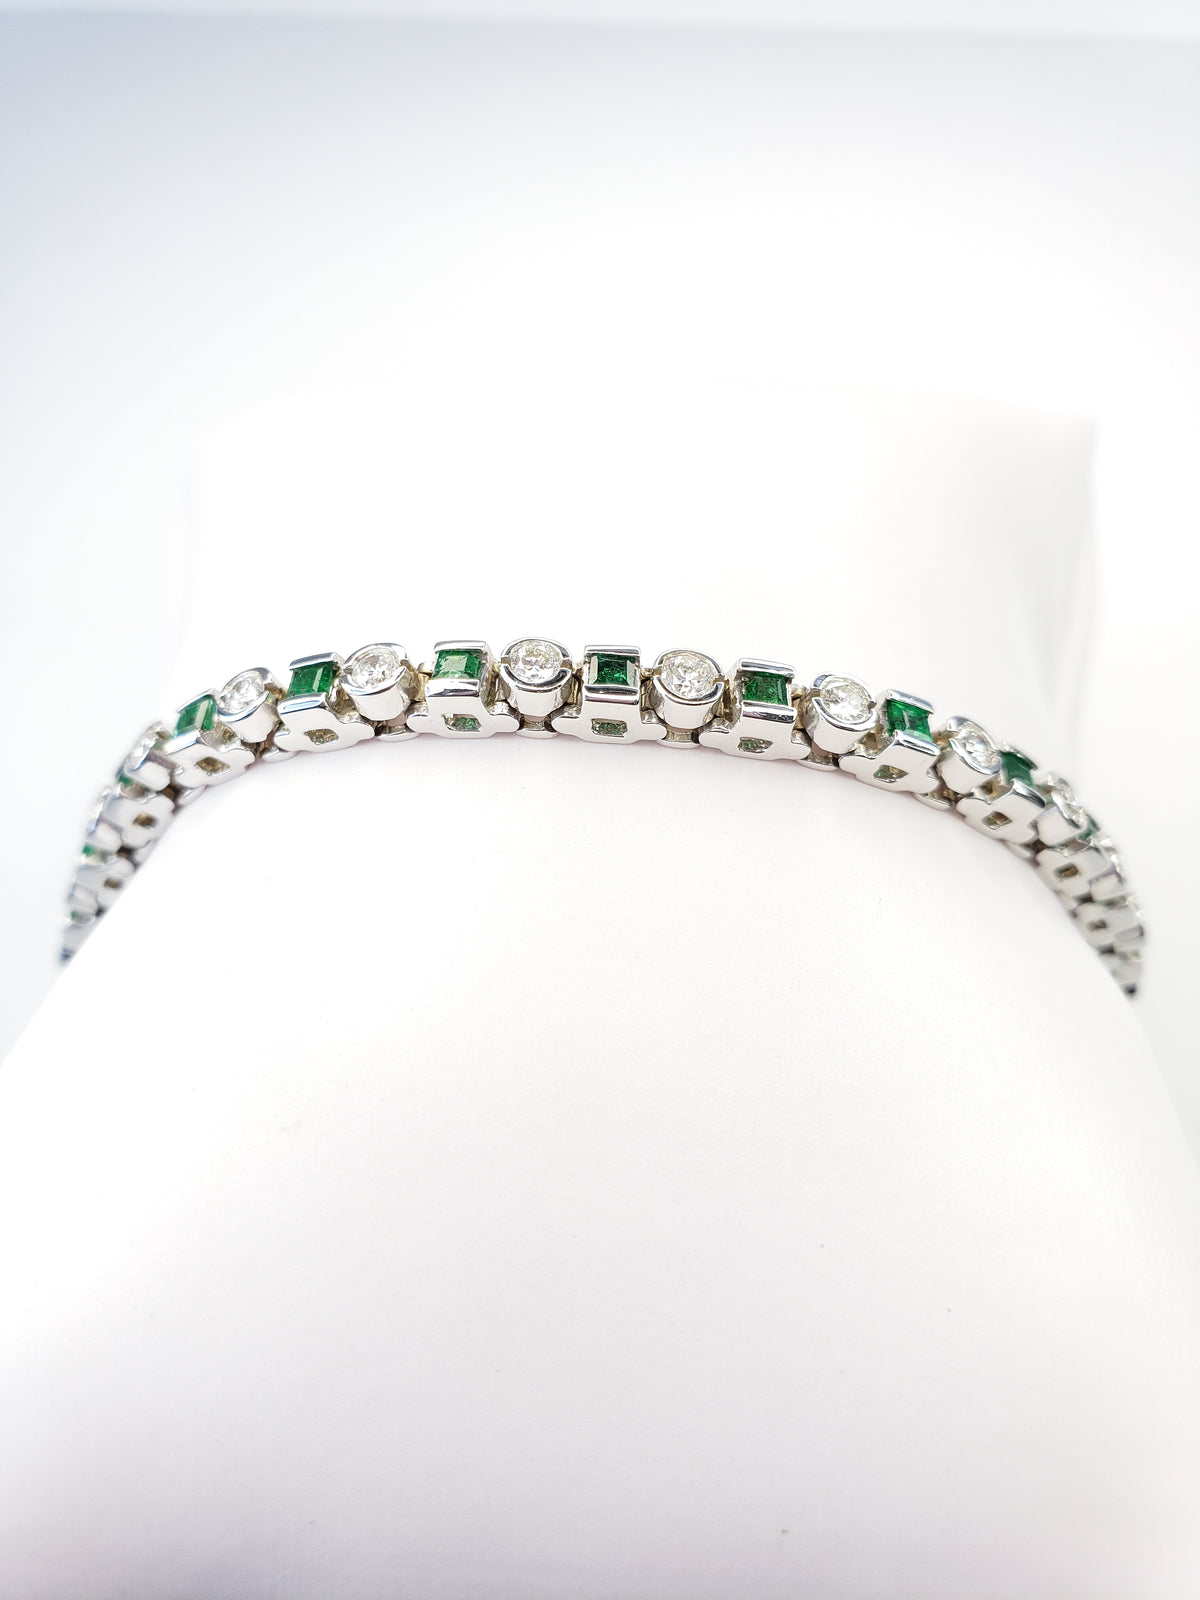 Emerald and Diamond Tennis Bracelet made in 14K White Gold